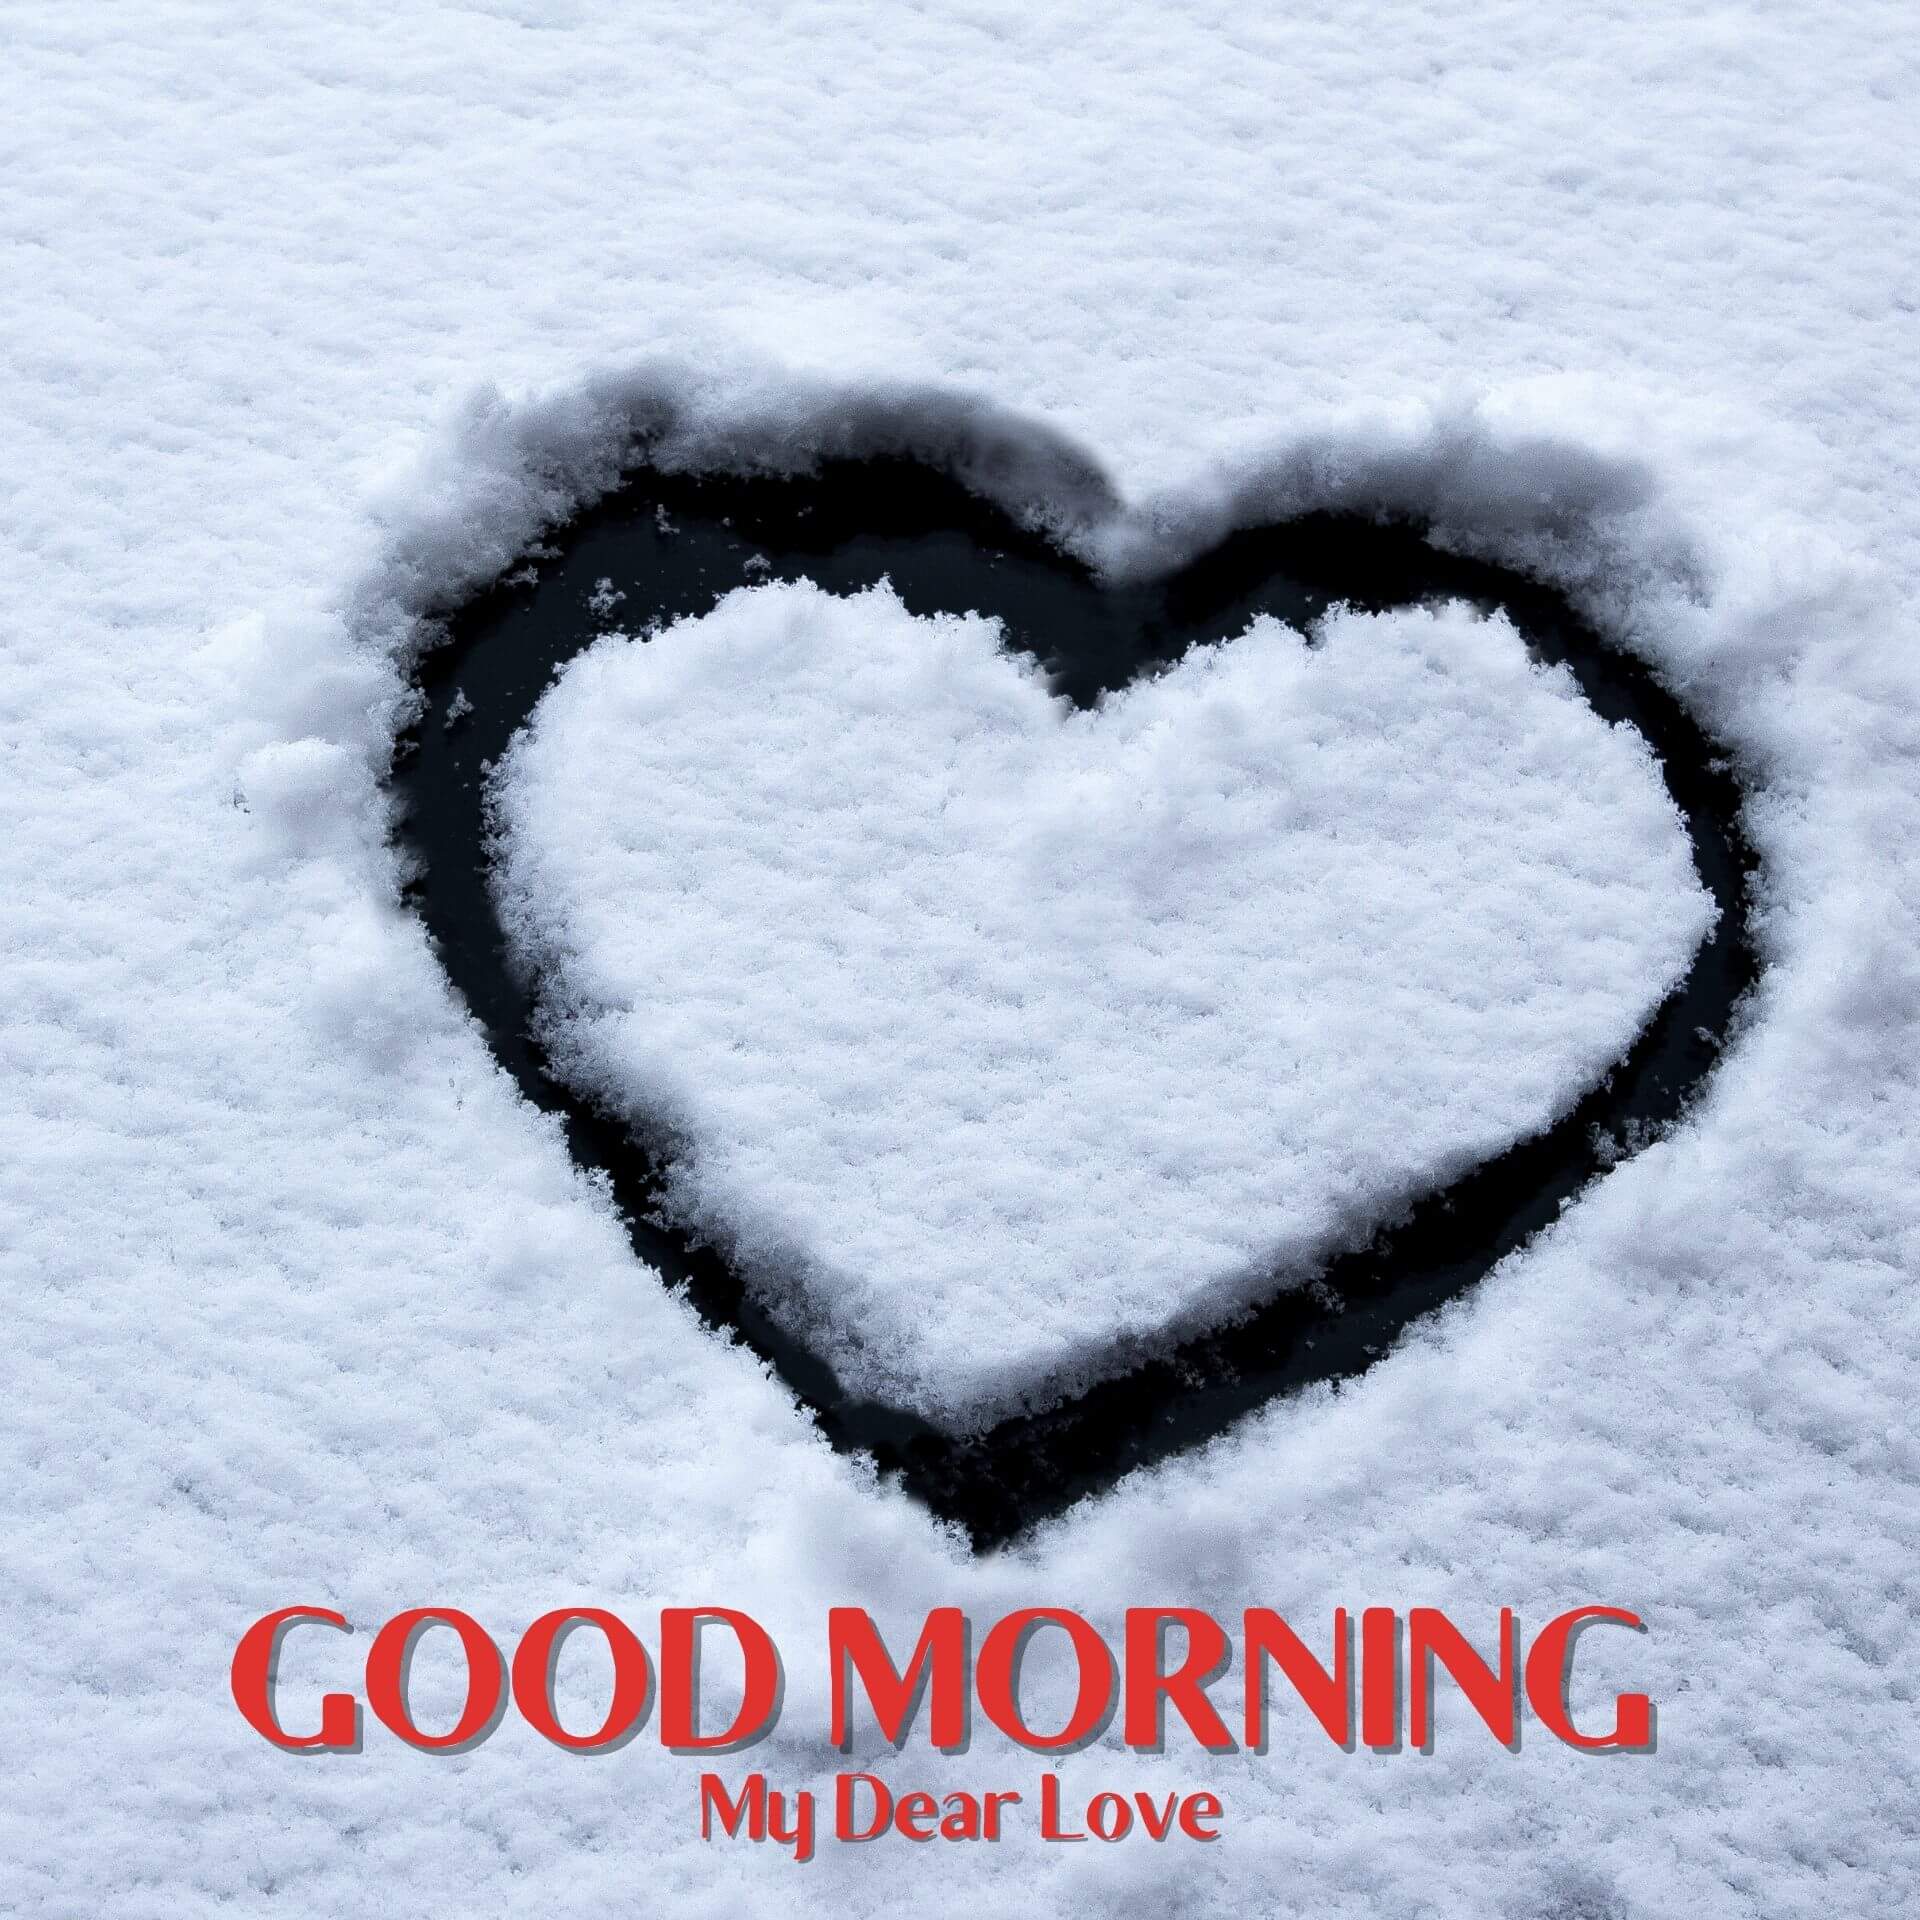 3D Heart Romantic Good Morning Images Download